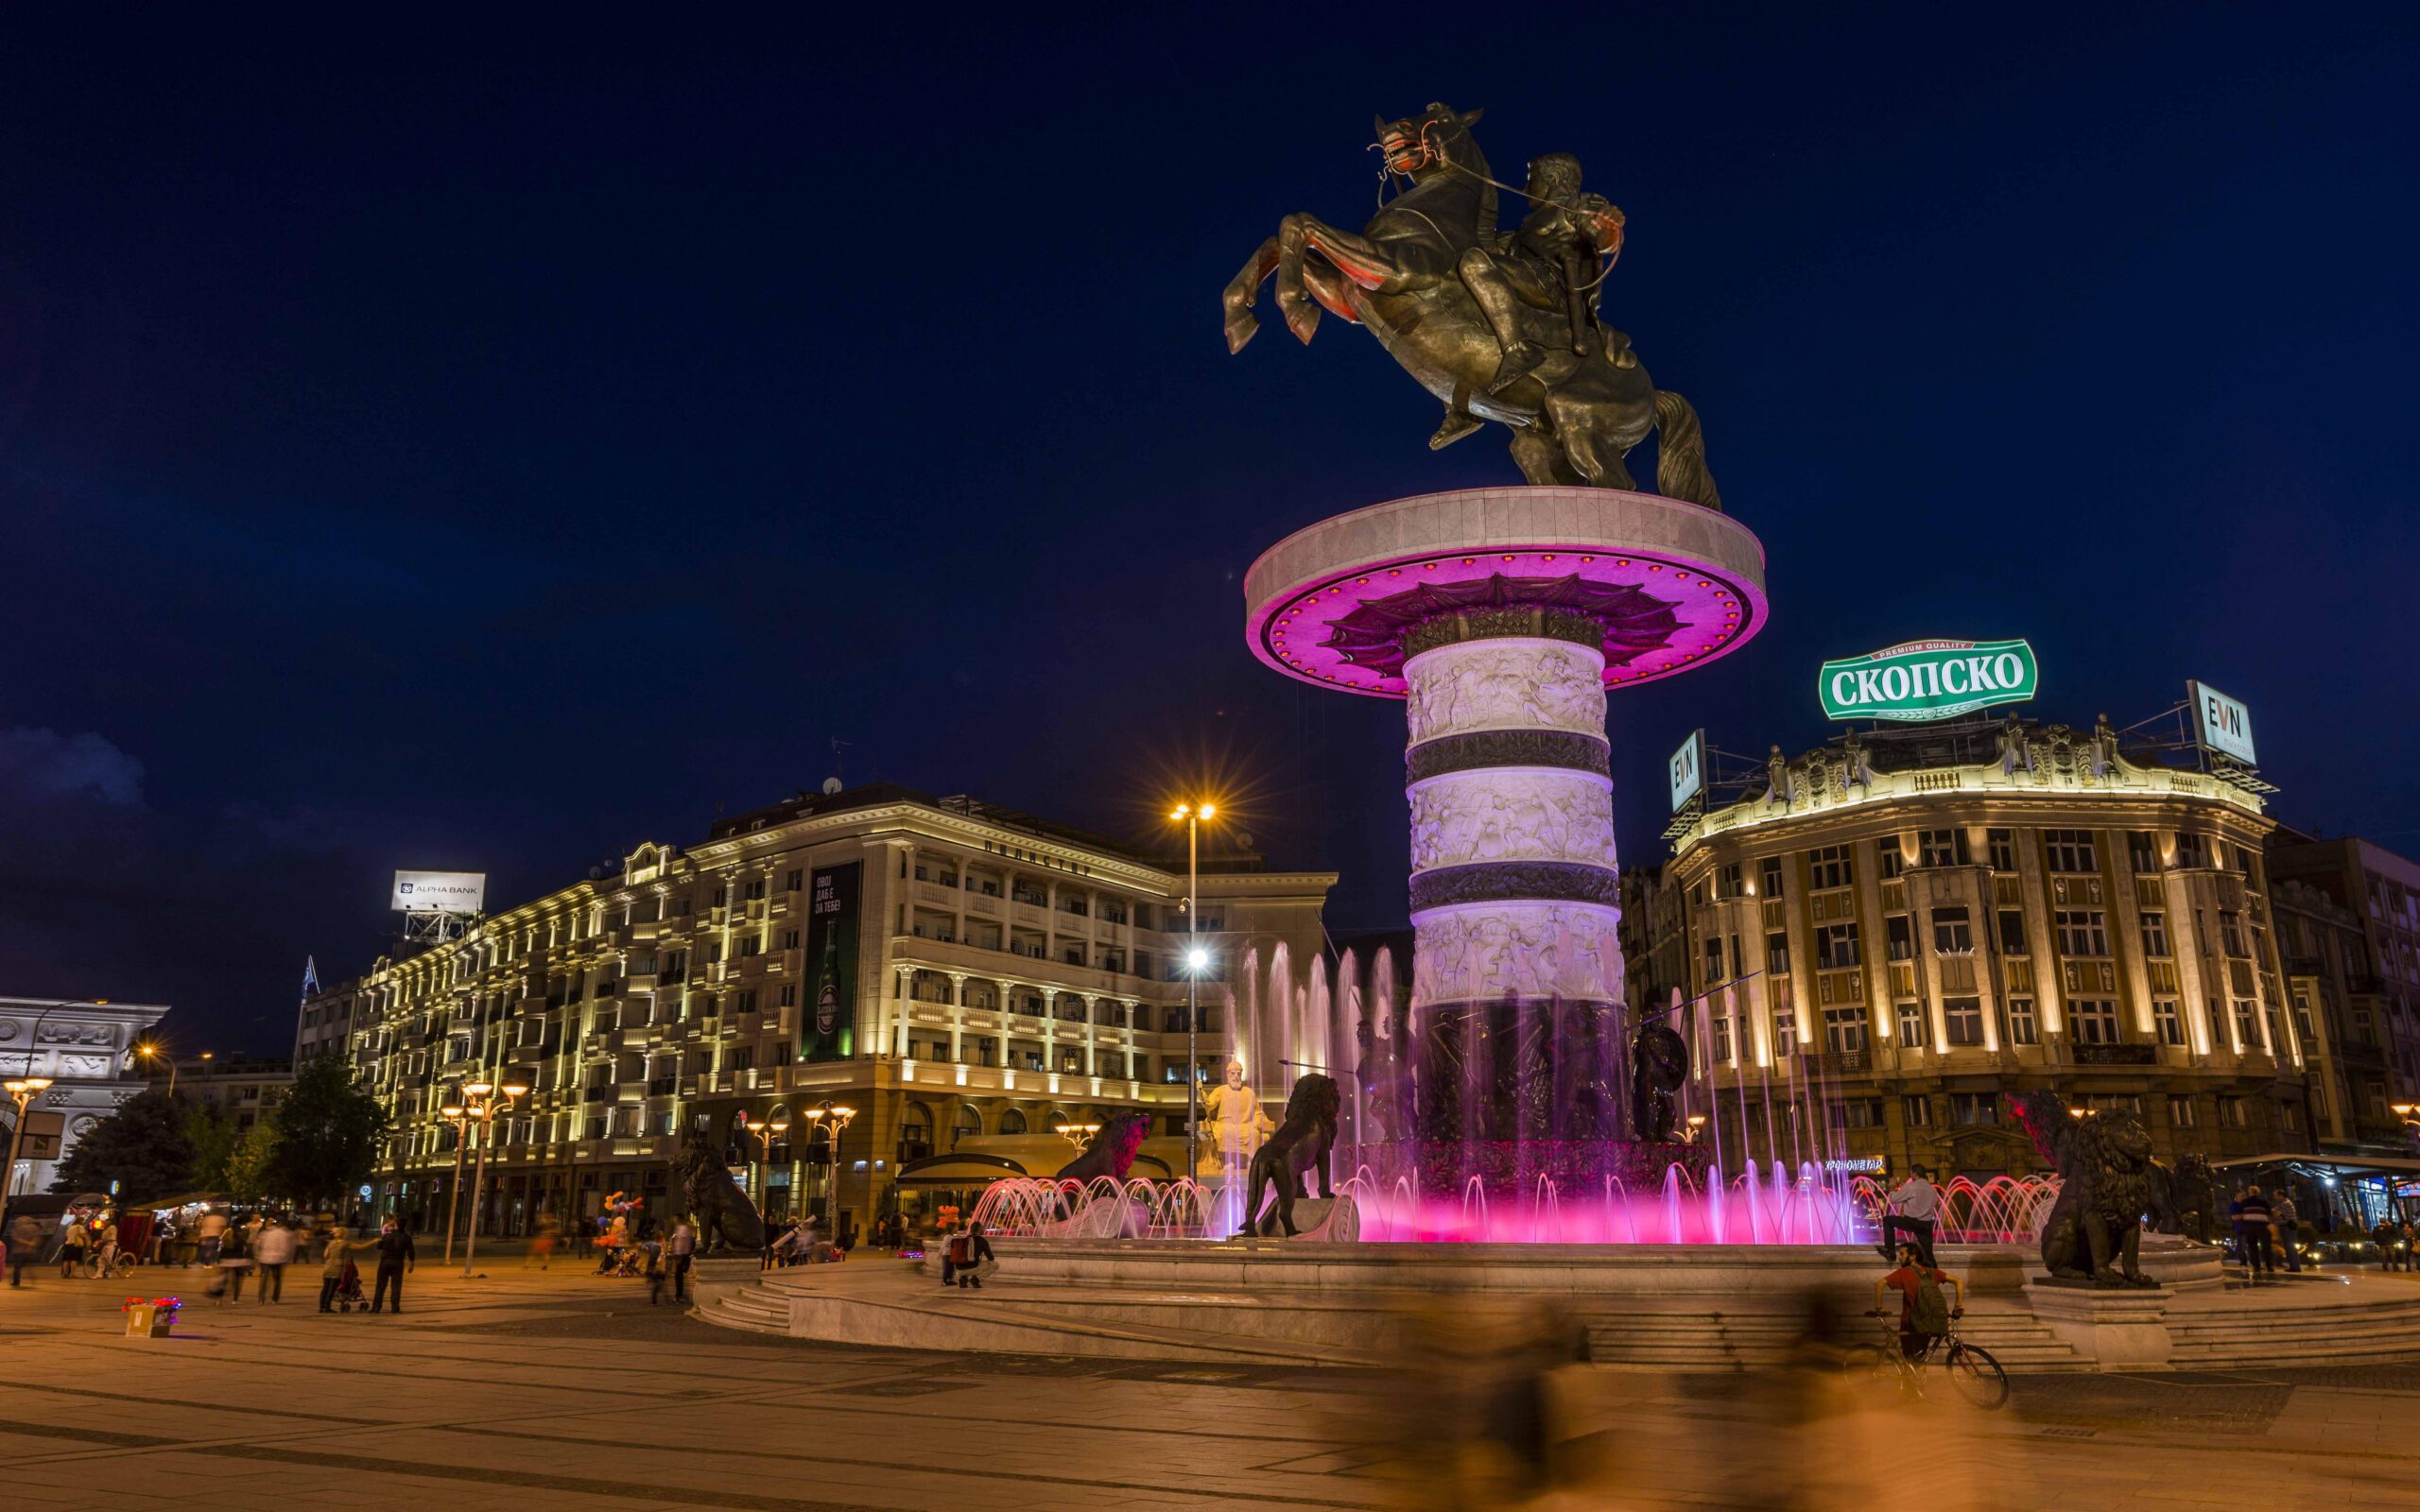 Macedonia Square Fountain And Monument Of Alexander Of Macedonia In